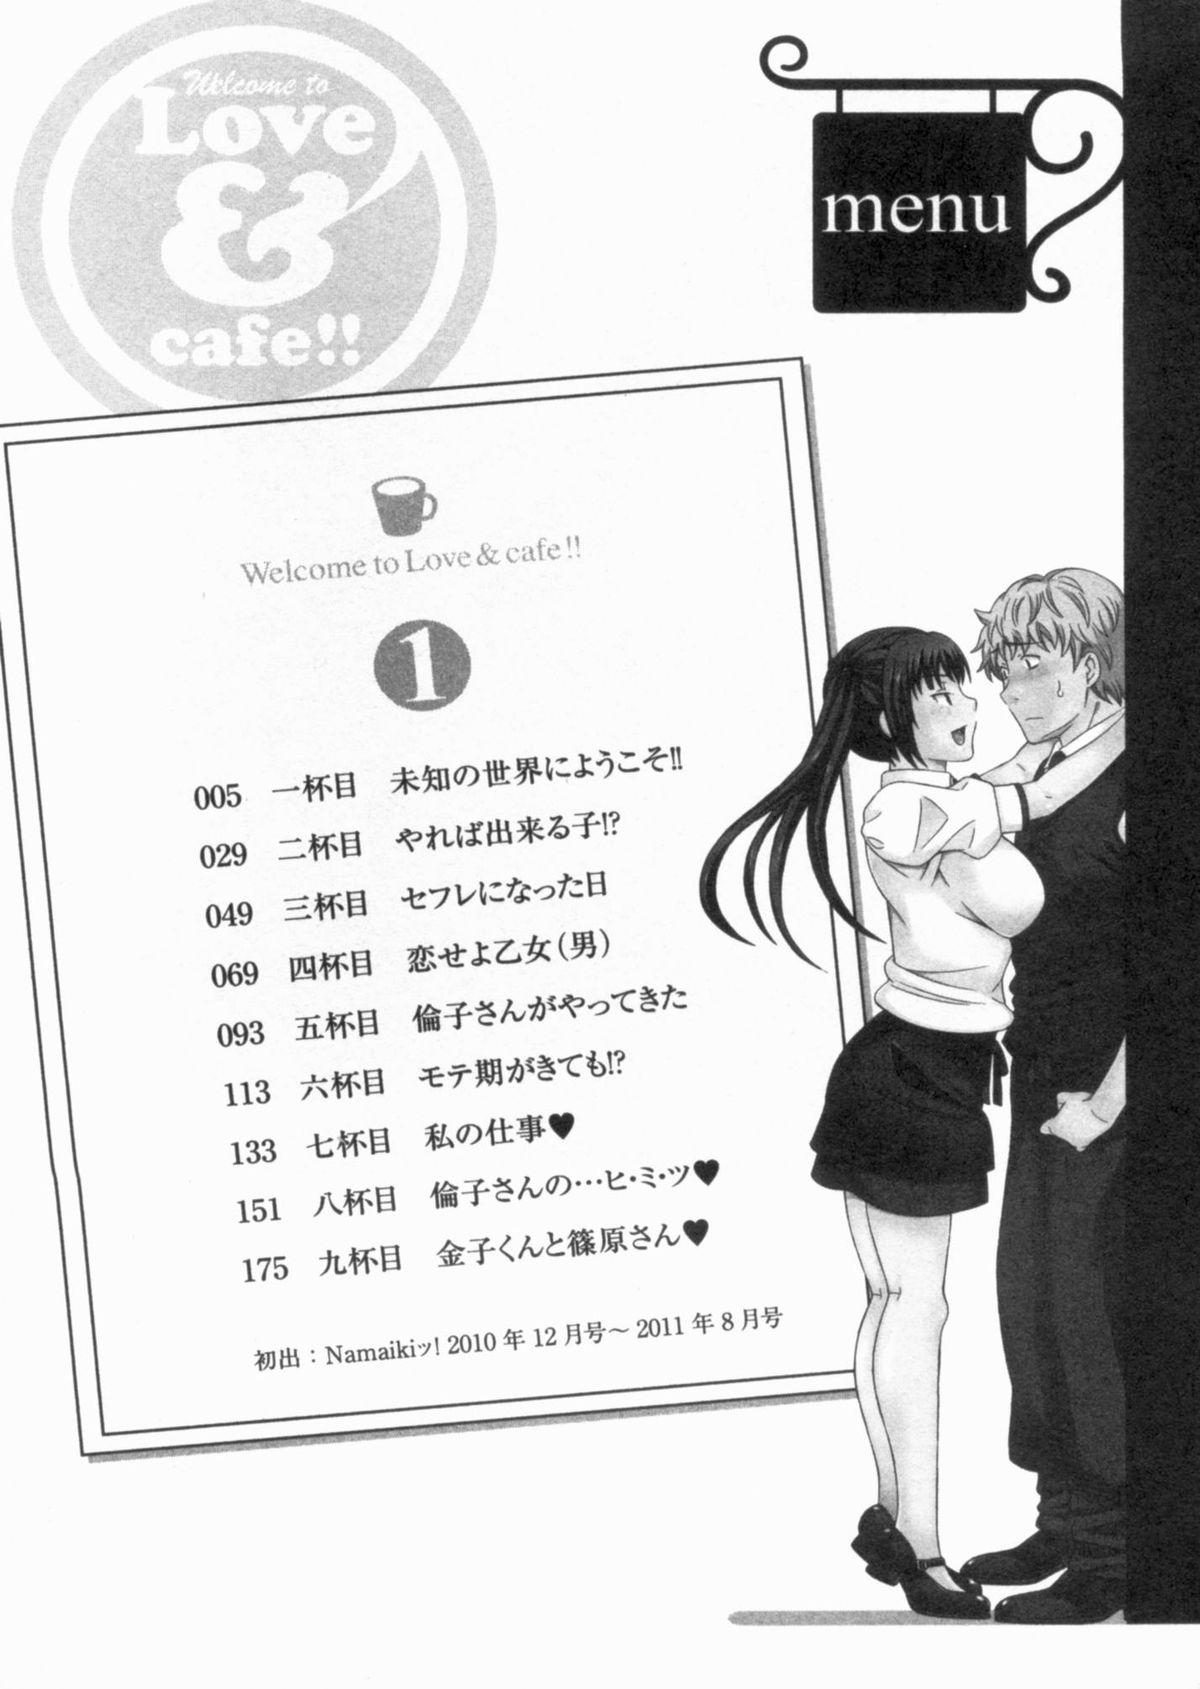 Asses Koi Cafe ni Youkoso!! 1 - Welcome to Love&cafe!! 1 Gaysex - Page 6